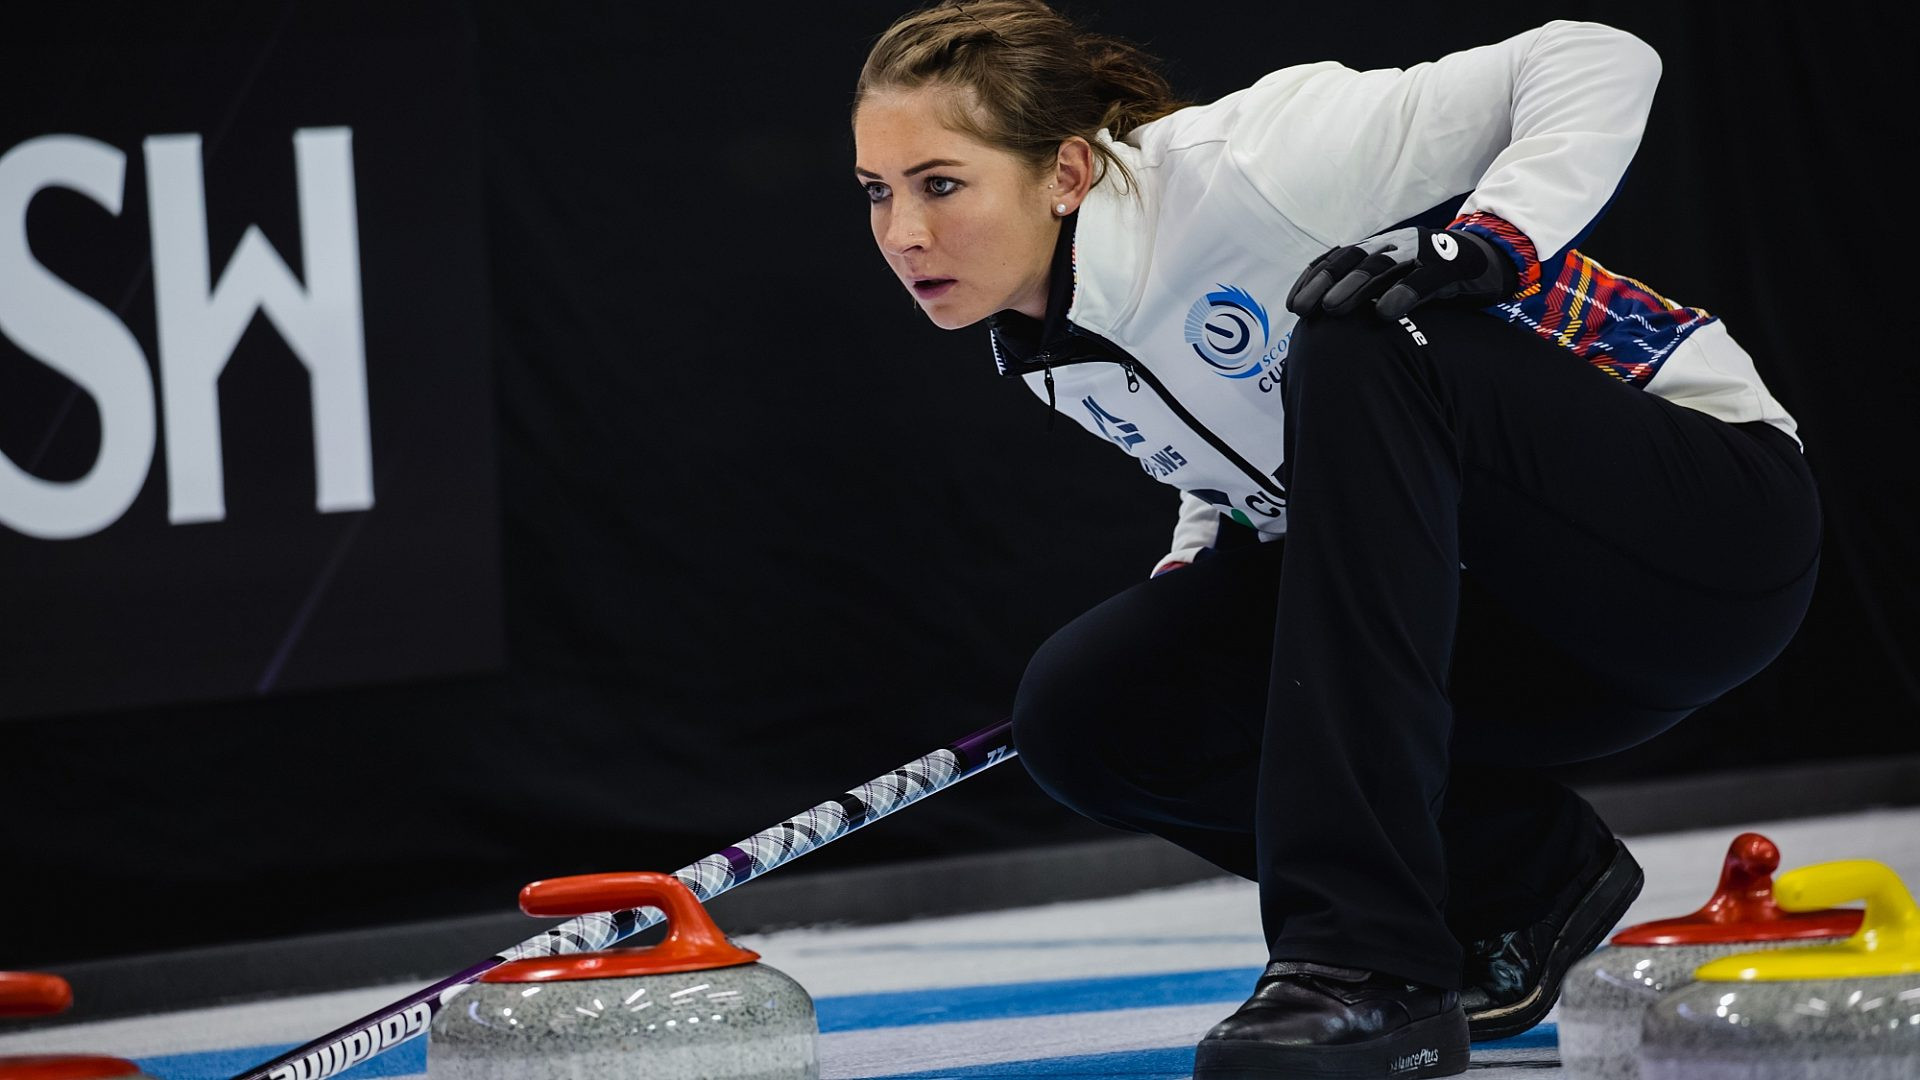 Scotland condemned Sweden to their second consecutive defeat at the Curling World Cup in Omaha ©Celine Stucki/World Curling Federation